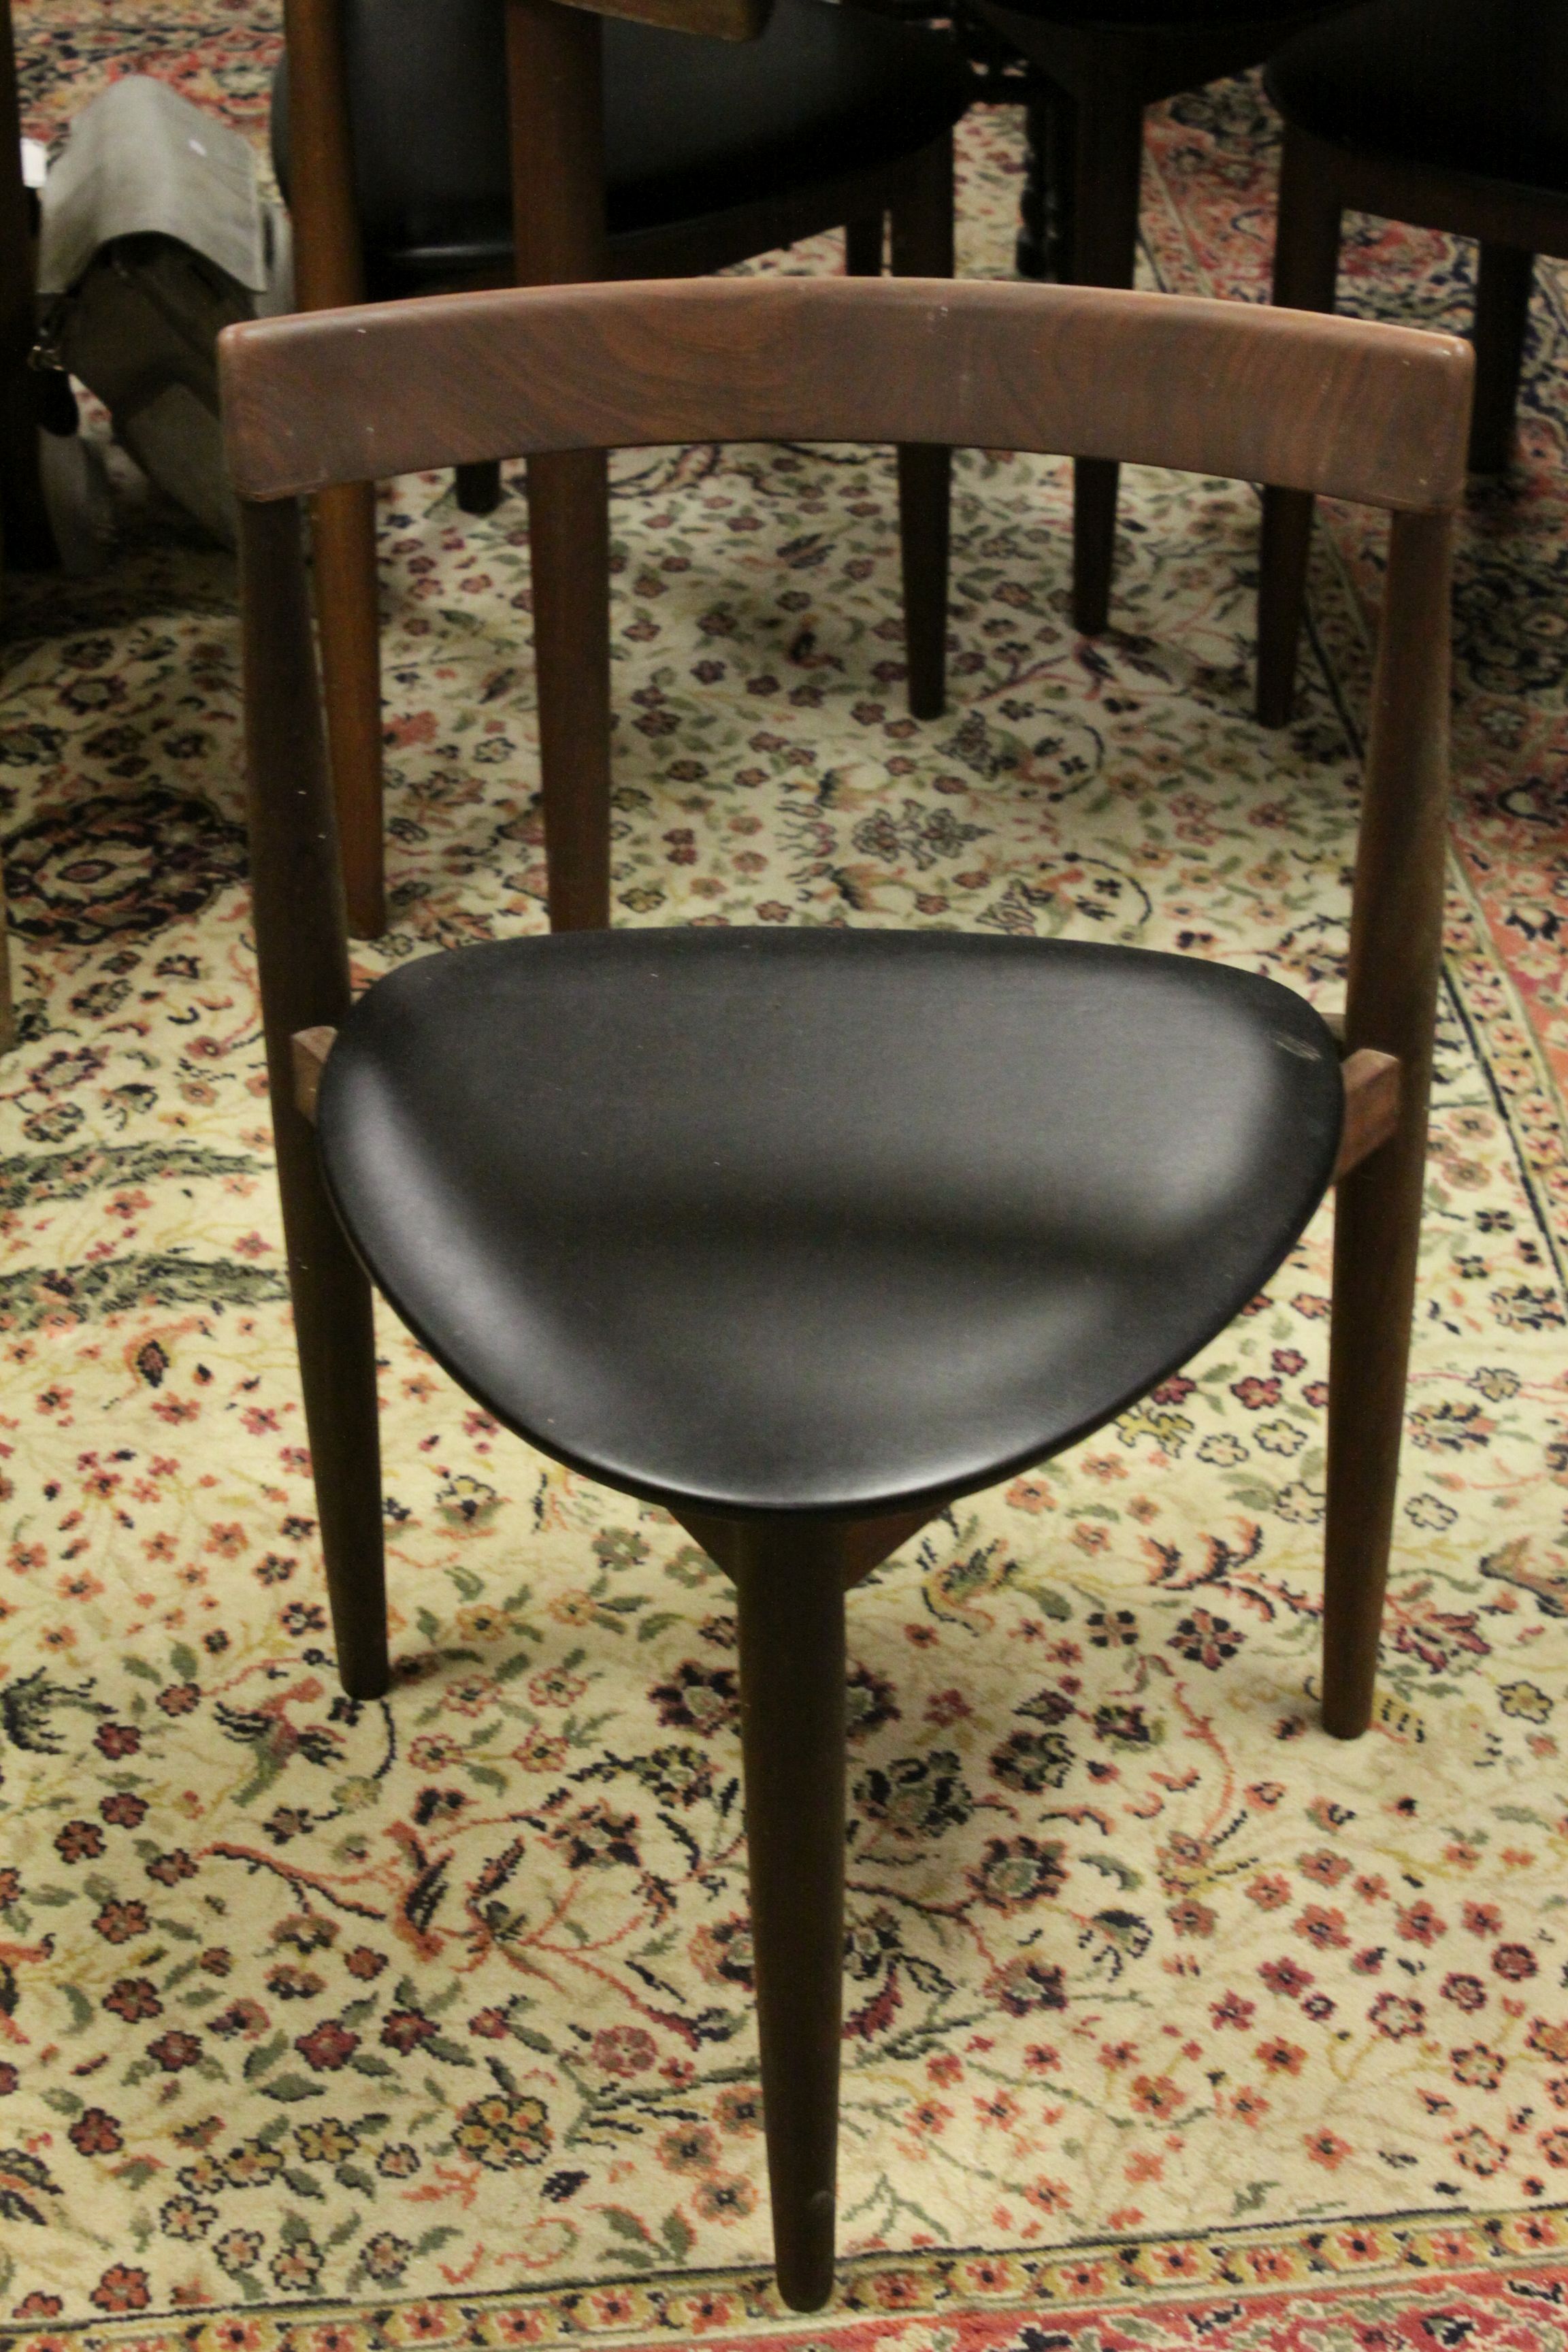 Retro 1960's Danish Teak Circular Dining Table with Glass Top and Four Curved Back matching - Image 3 of 7